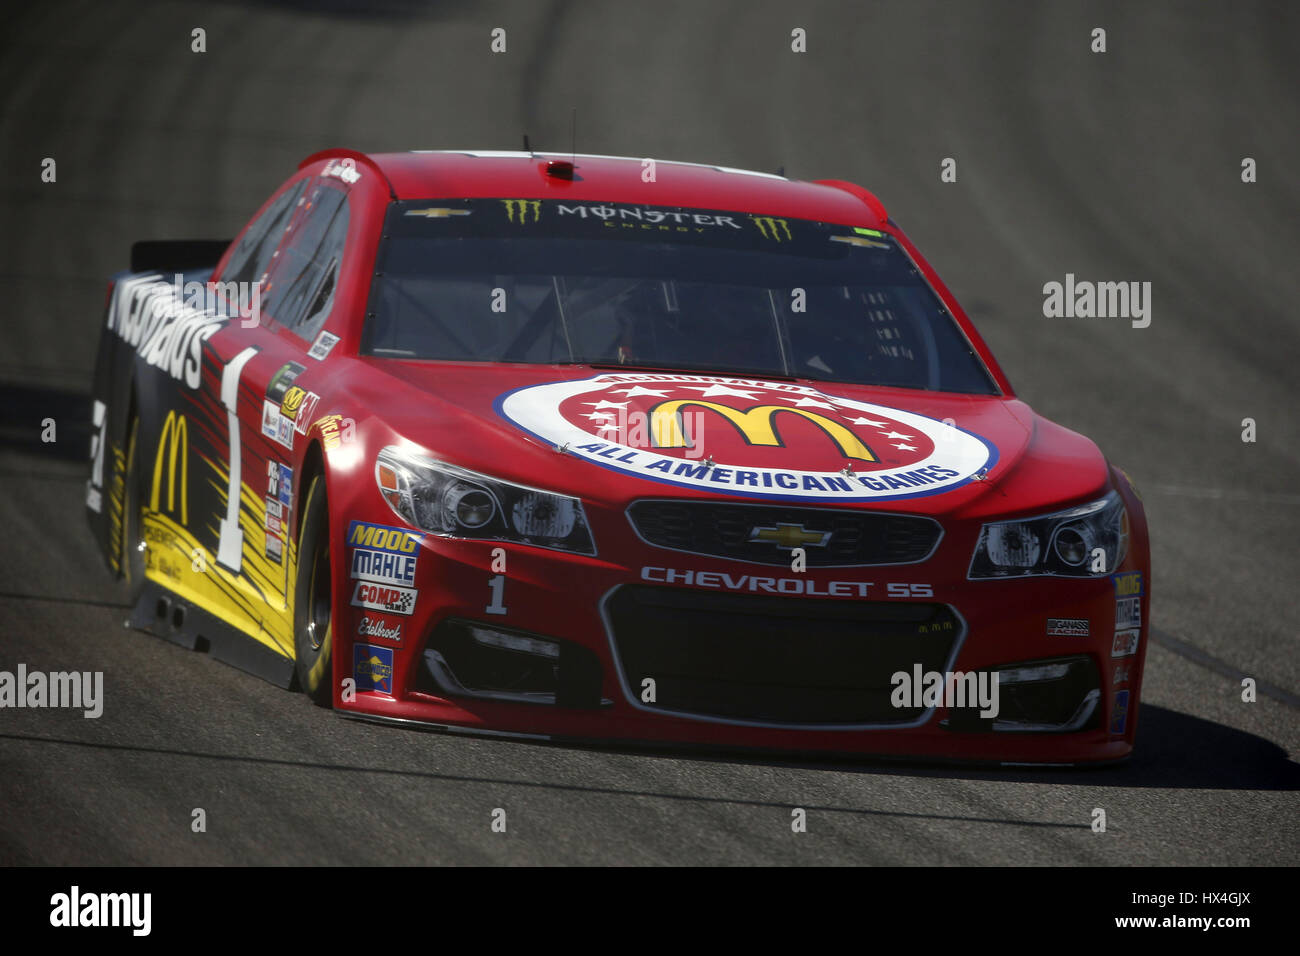 Fontana, California, USA. 24th Mar, 2017. March 24, 2017 - Fontana, California, USA: Jamie McMurray (1) takes to the track to practice for the Auto Club 400 at Auto Club Speedway in Fontana, California. Credit: Jusitn R. Noe Asp Inc/ASP/ZUMA Wire/Alamy Live News Stock Photo